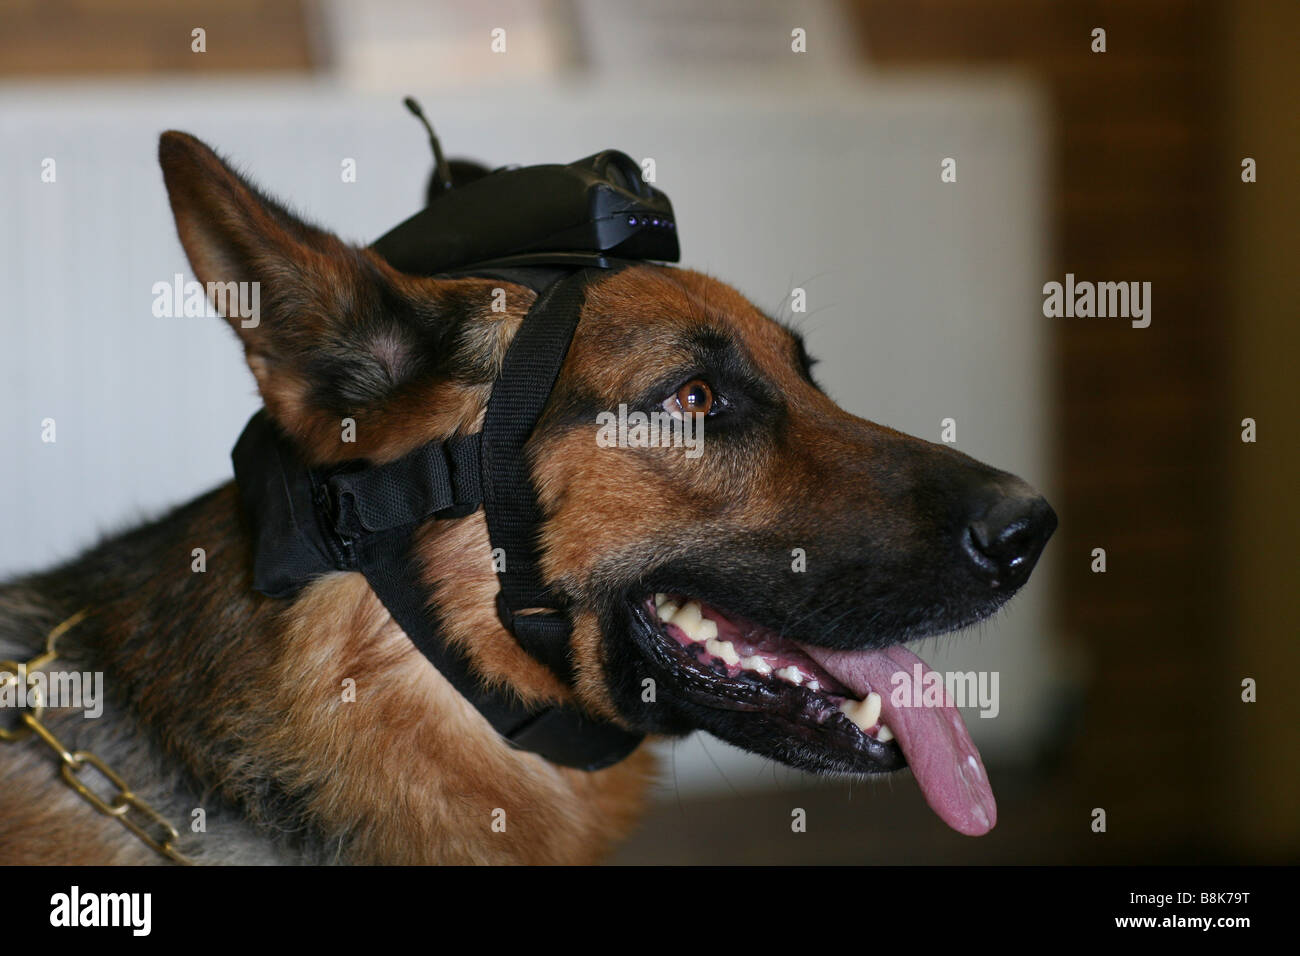 a police dog equipped with a camera strapped to its head for police surveilance work in the UK Stock Photo